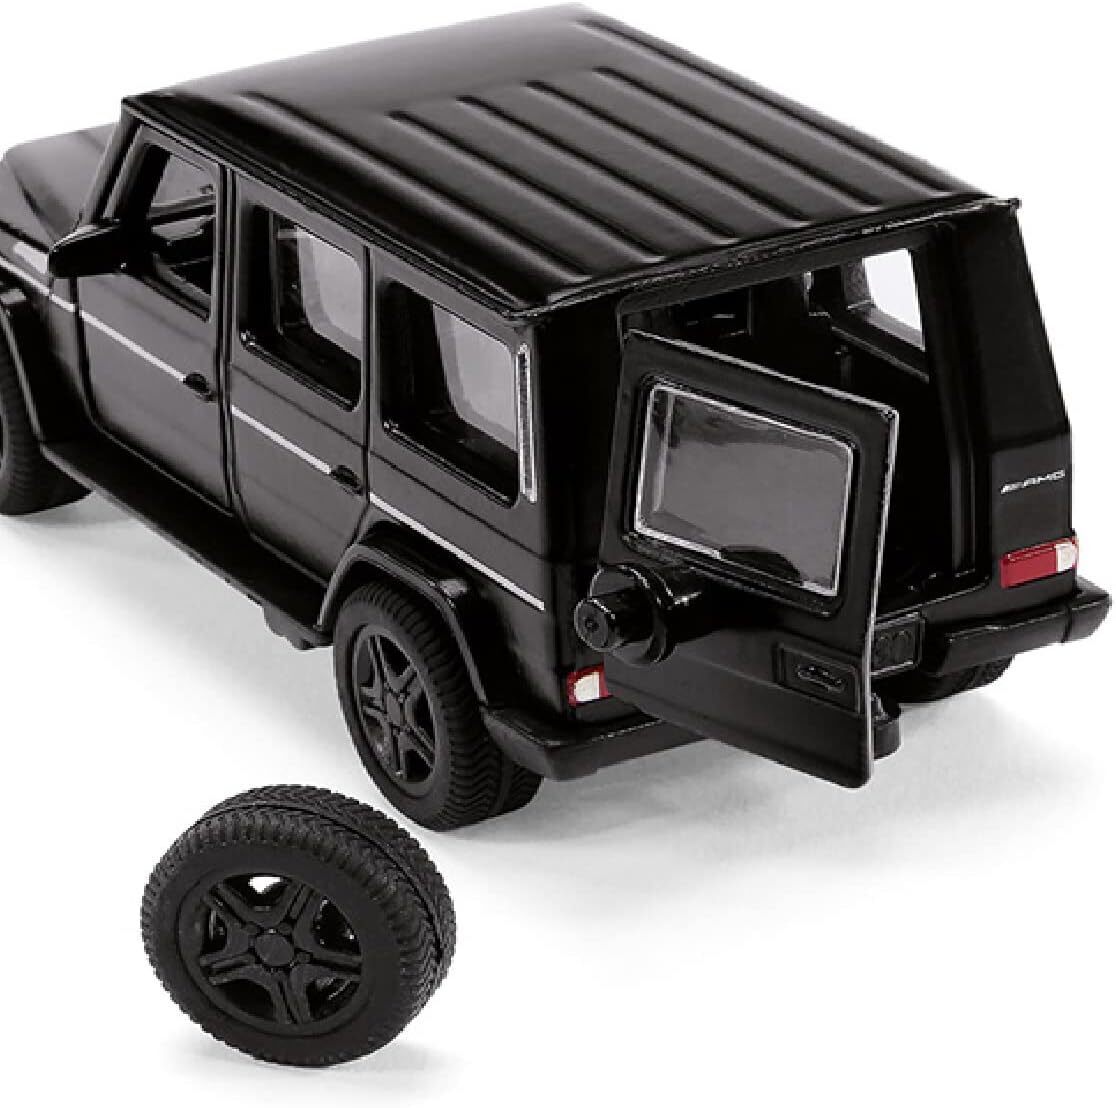 Mercedes Benz G65 AMG 1:50 Scale Model by Siku Boxed/New 2350 